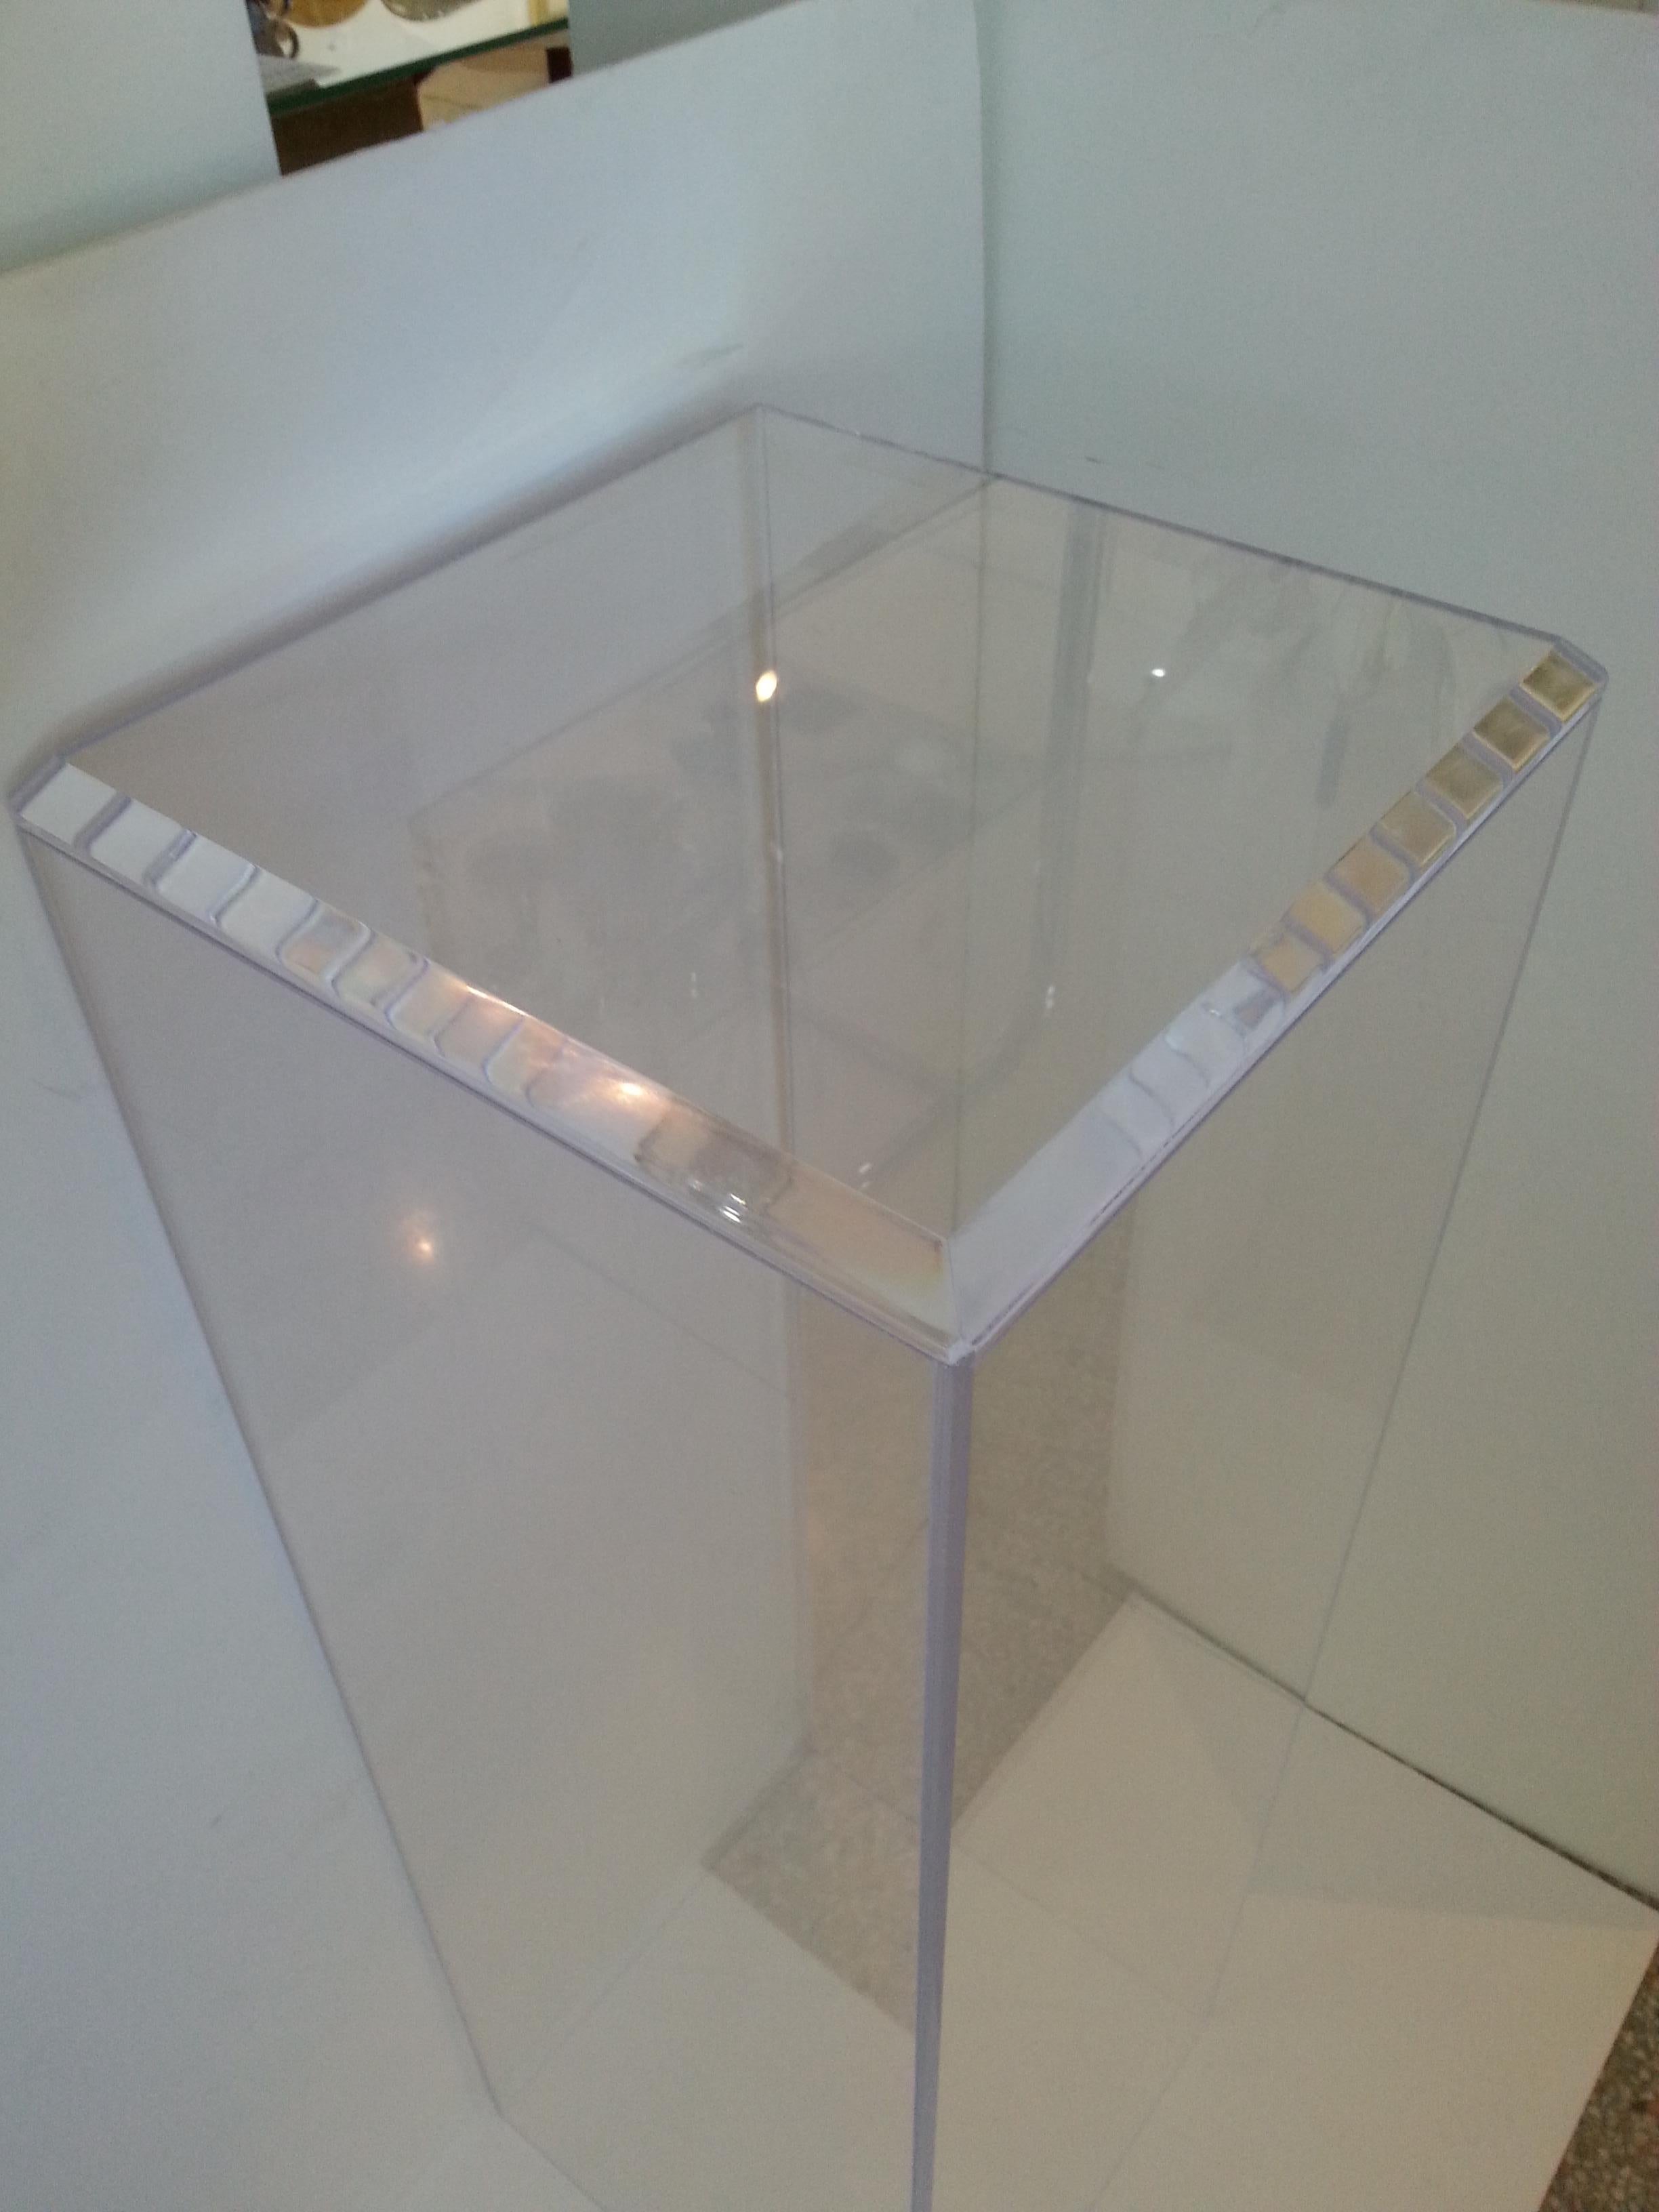 (One) Lucite Pedestal with a Beveled Edge 1